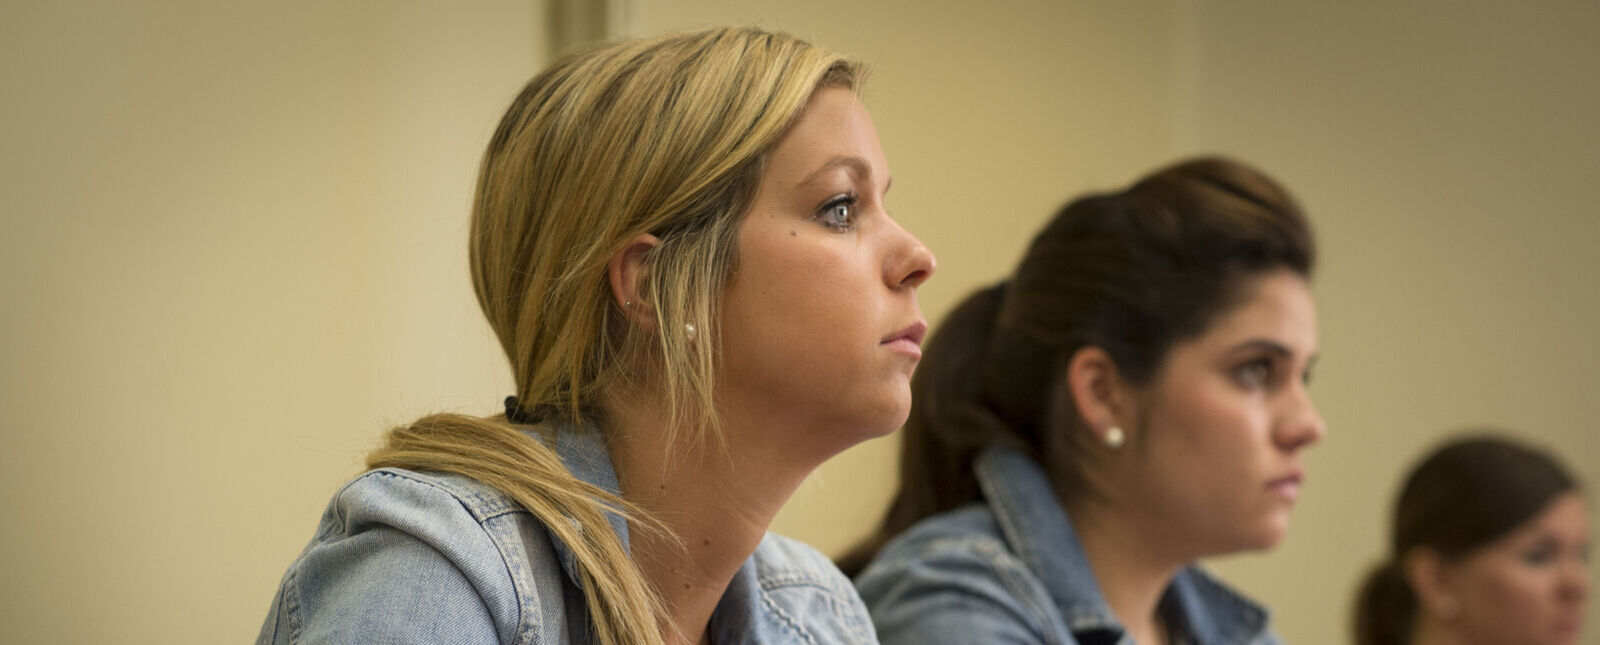 Two female students listen during a class